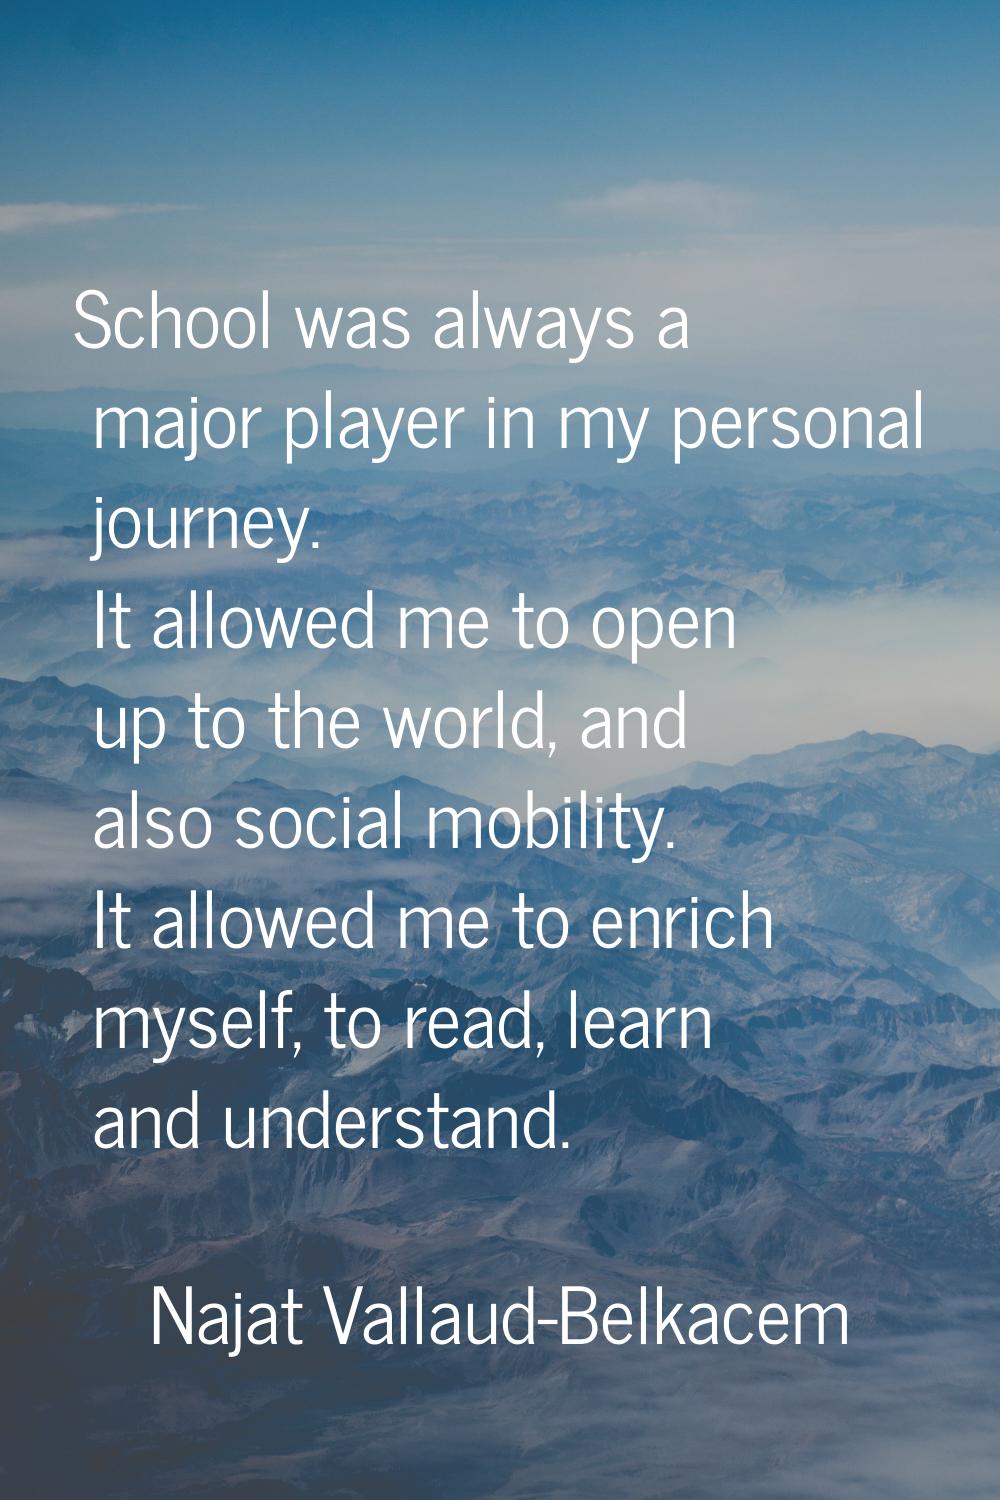 School was always a major player in my personal journey. It allowed me to open up to the world, and